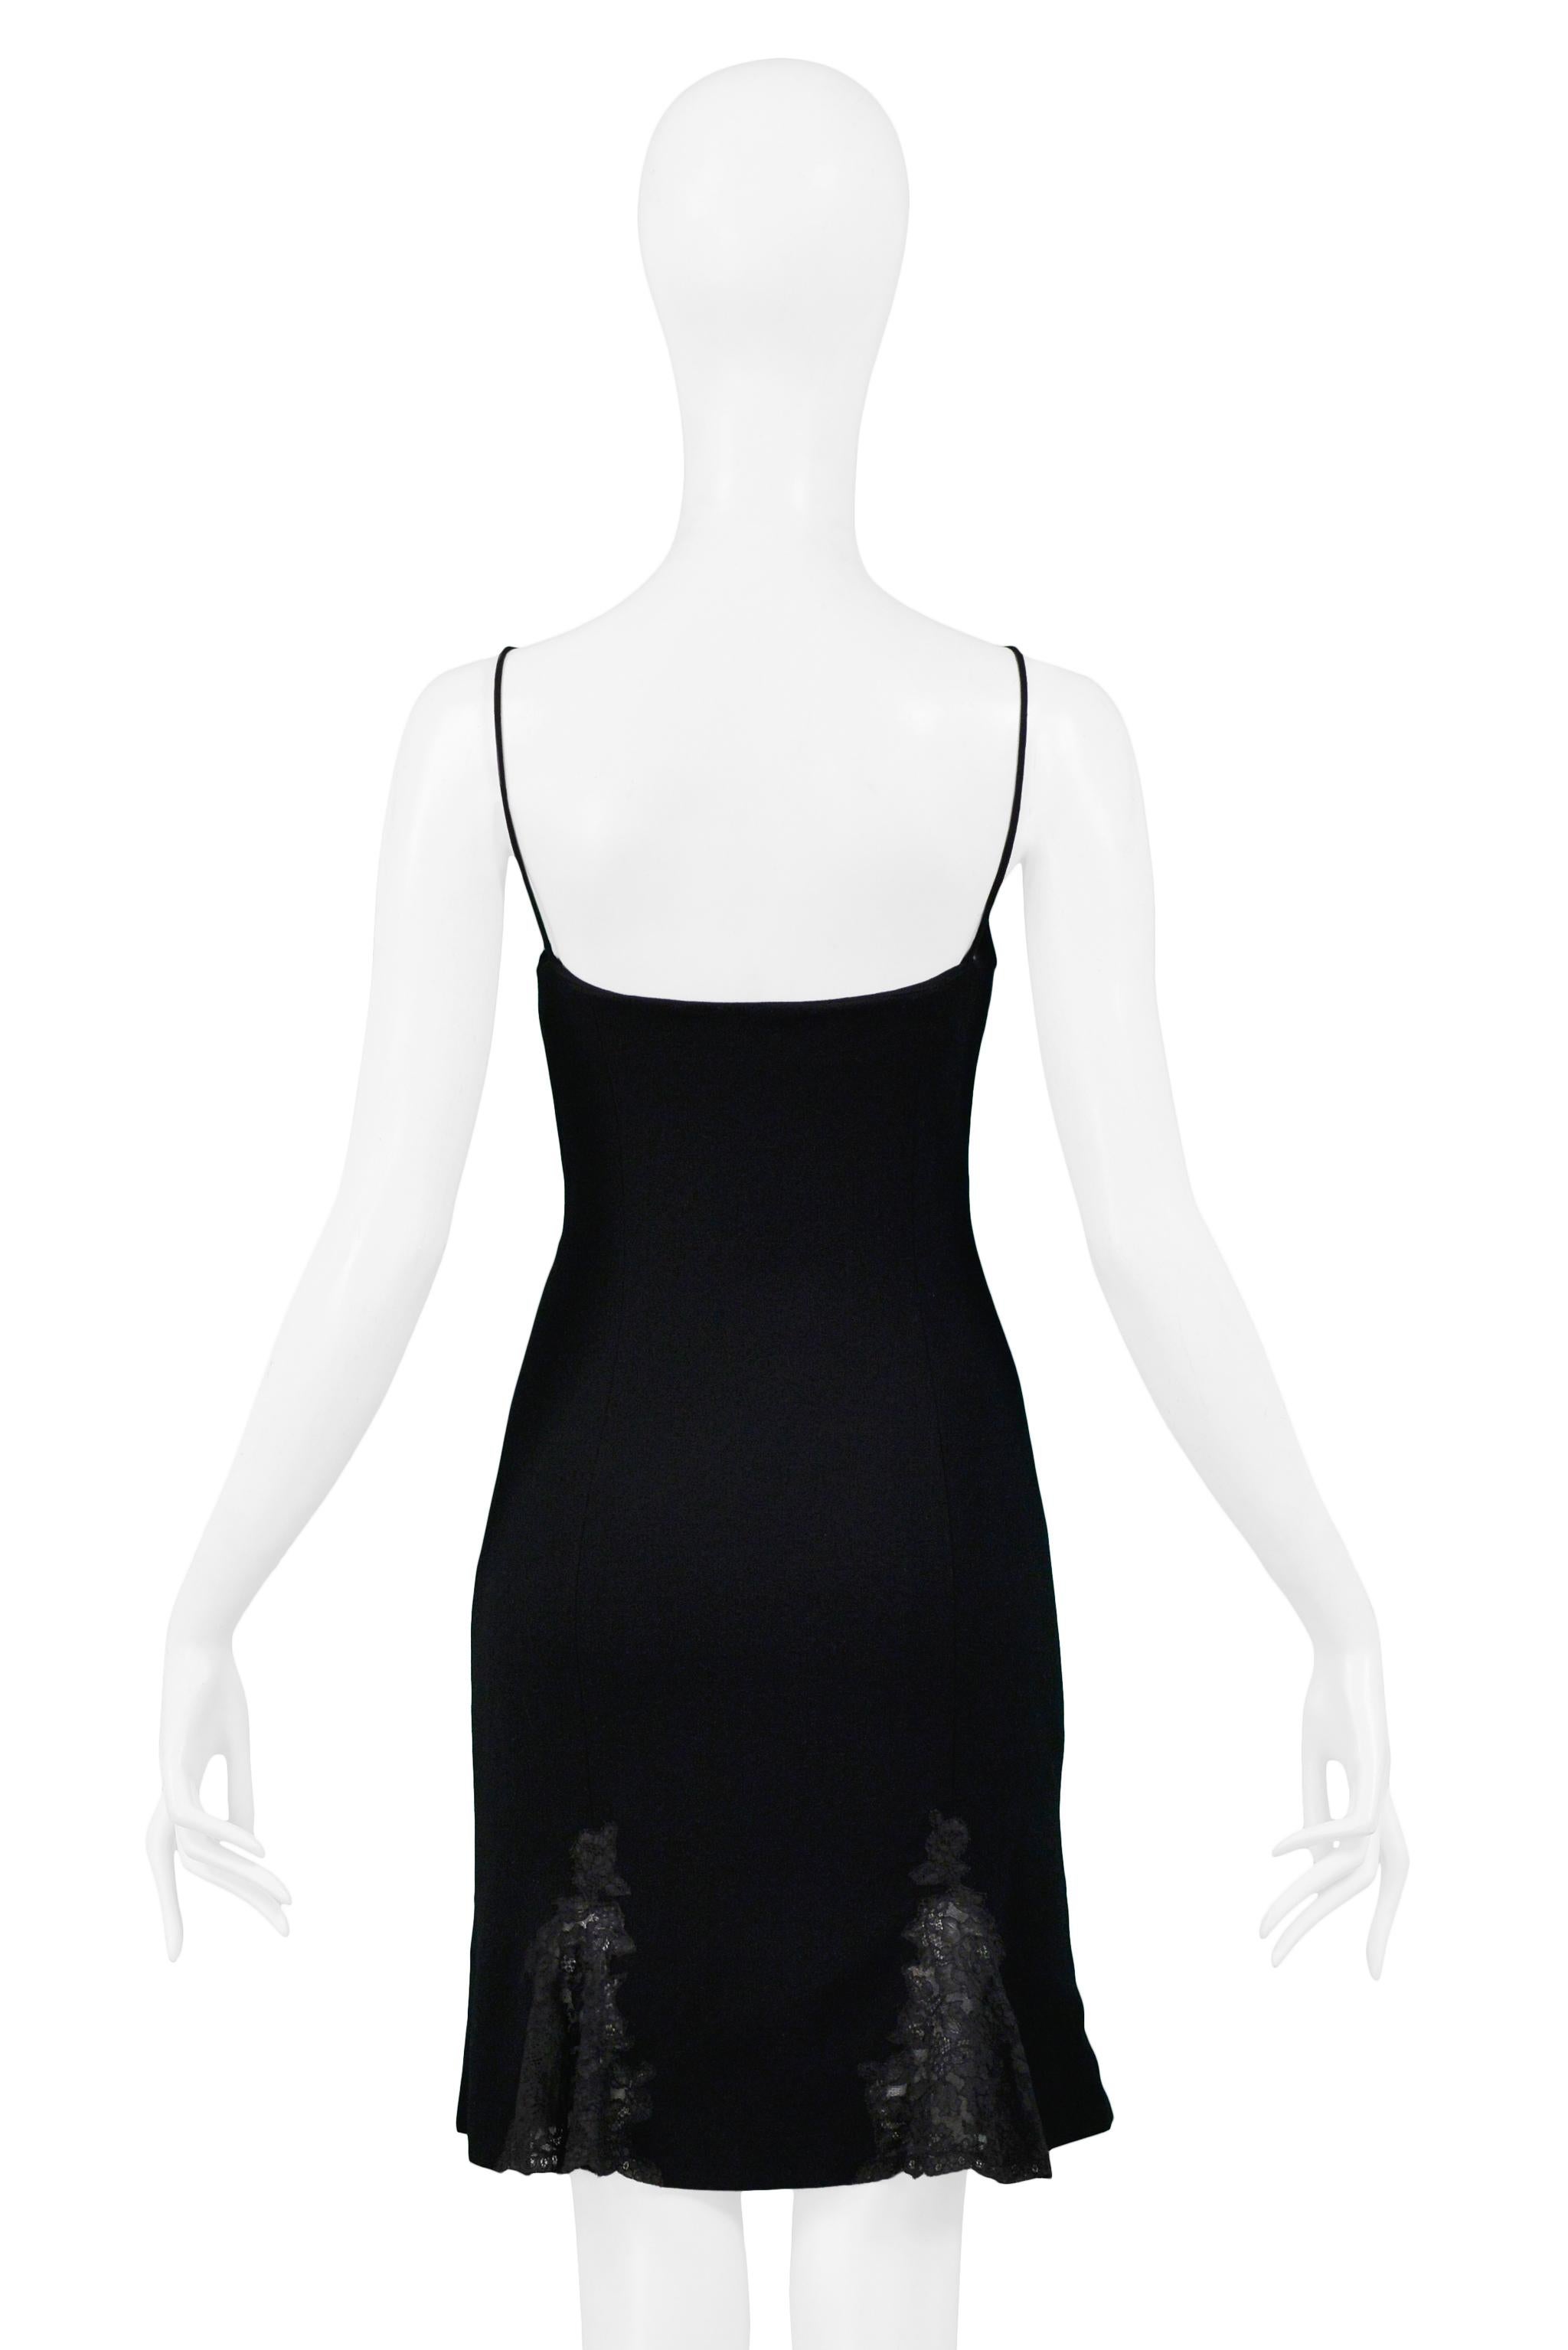 Christian Dior By John Galliano Black Slip Dress With Lace Panels In Excellent Condition For Sale In Los Angeles, CA